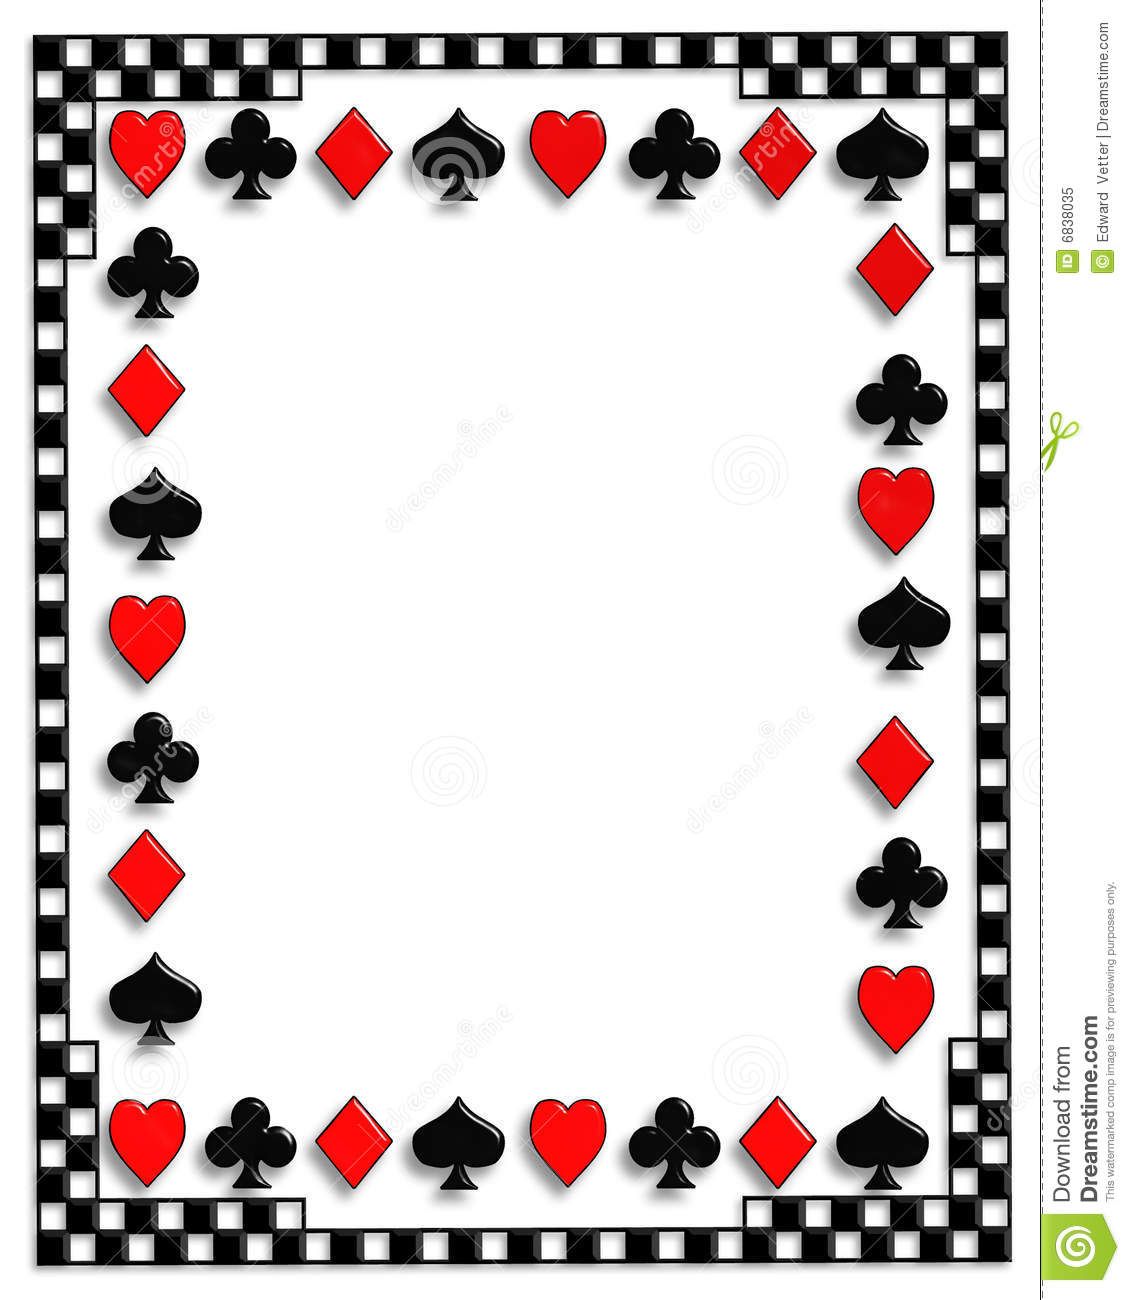 Playing card images.